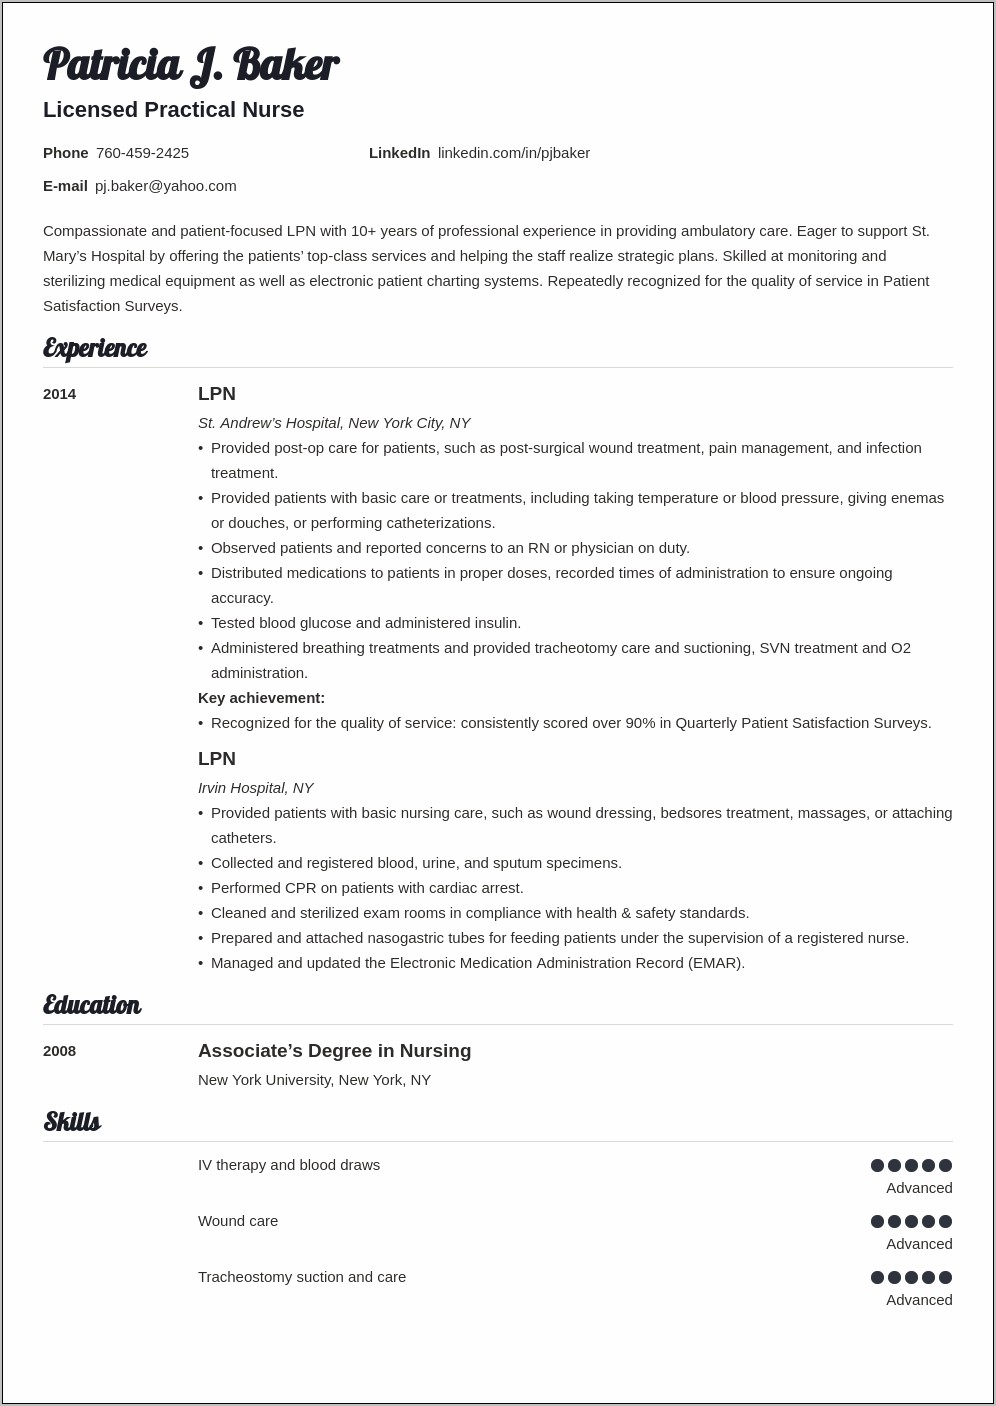 Resume Objective For An Lpn